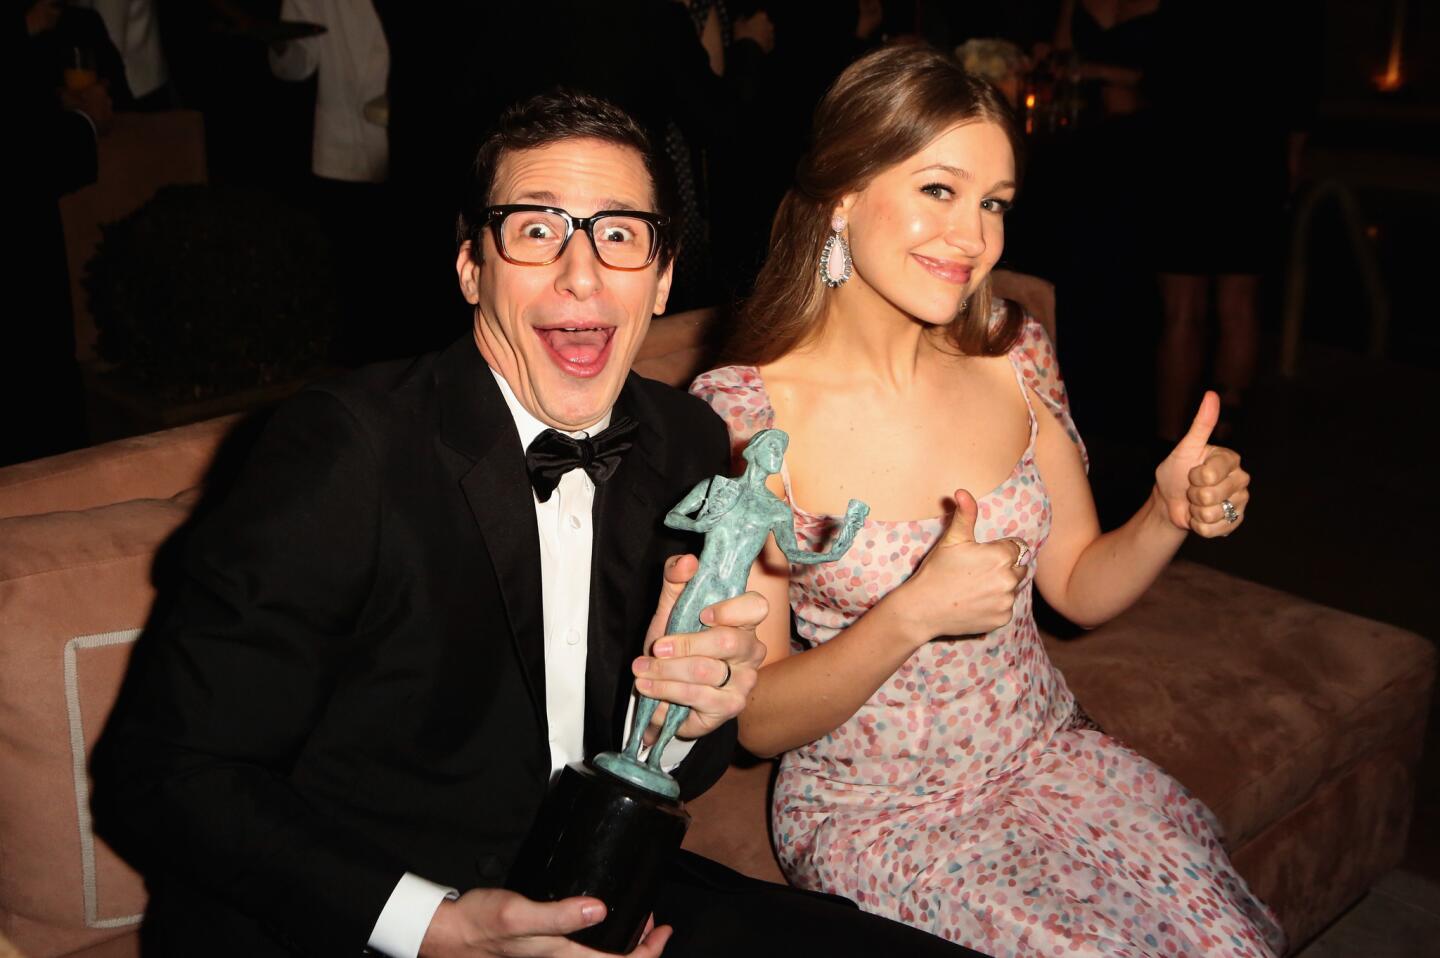 "Brooklyn Nine-Nine" actor Andy Samberg and singer Joanna Newsom attend the 2015 SAG Awards after-party hosted by Weinstein Co. and Netflix at the Sunset Tower in West Hollywood on Jan. 25, 2015.